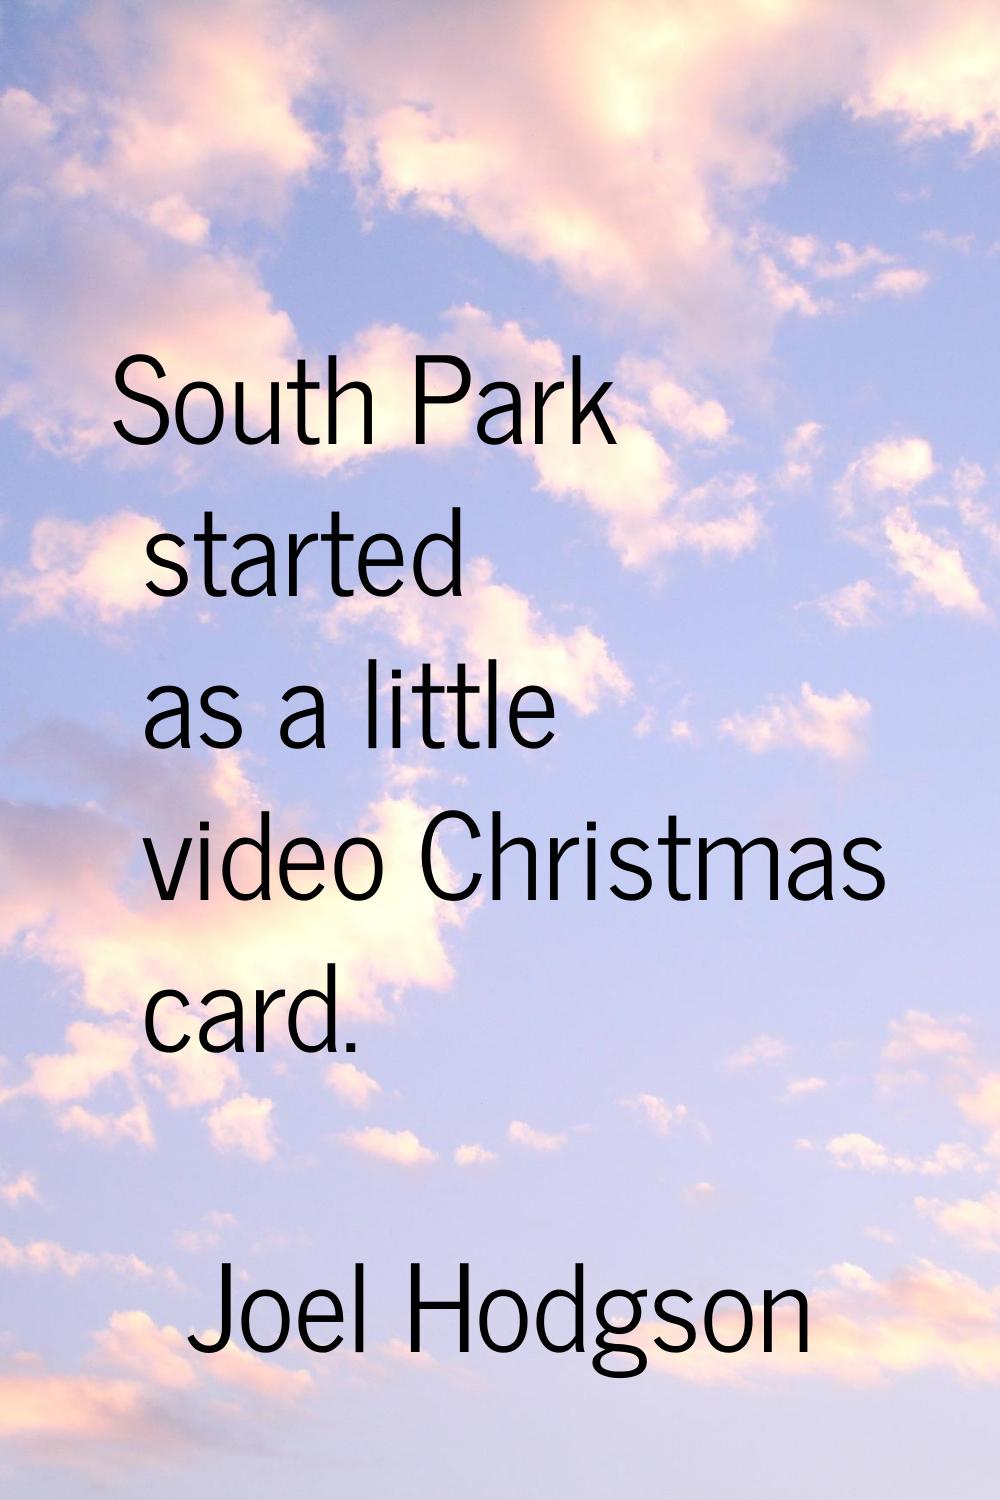 South Park started as a little video Christmas card.